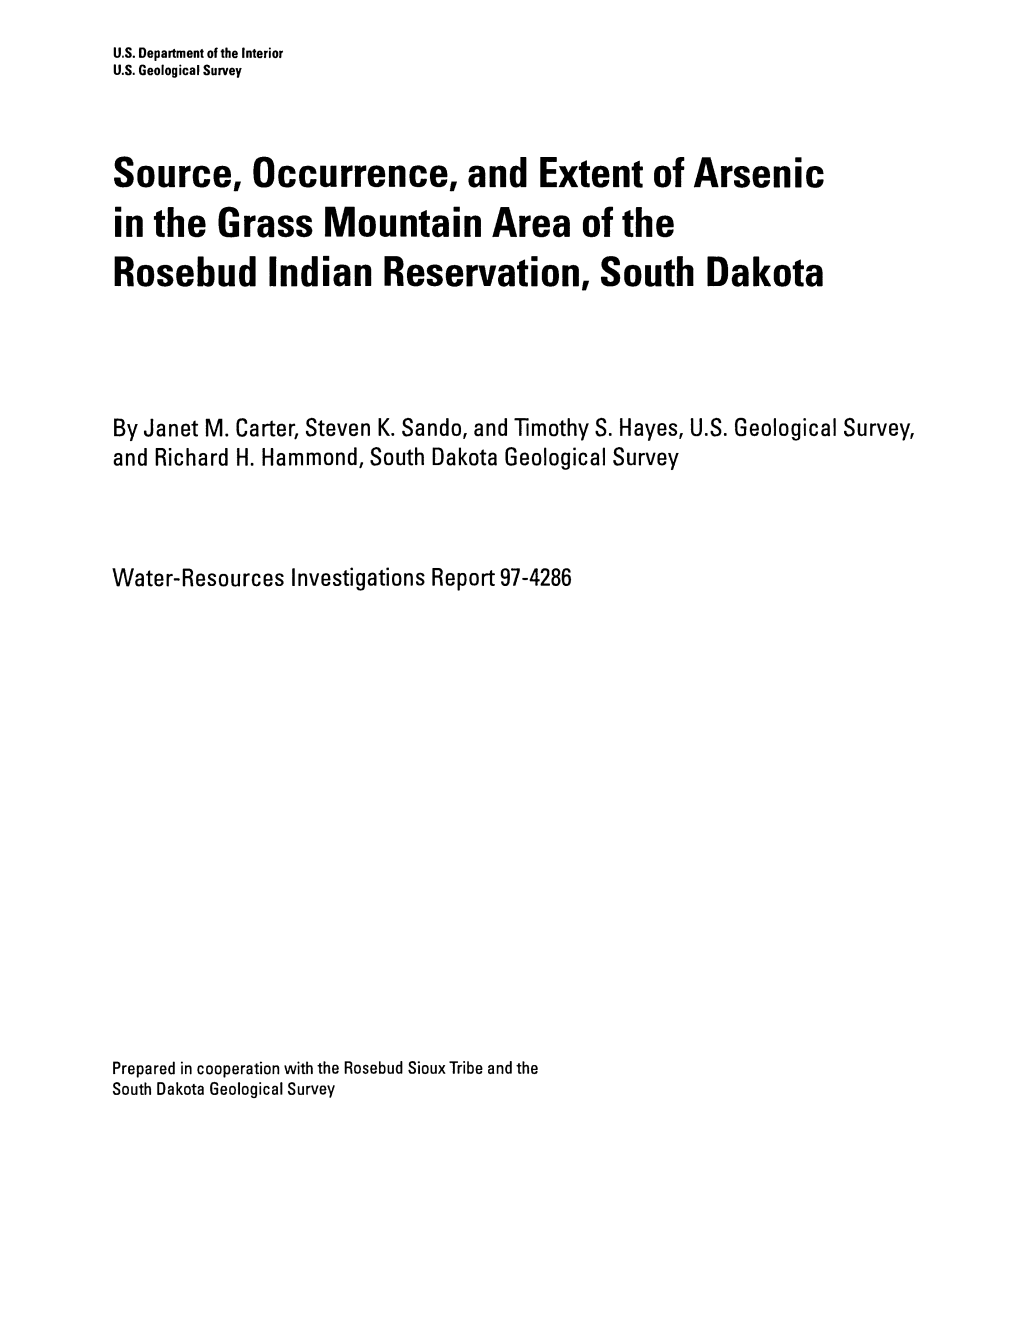 Source, Occurrence, and Extent of Arsenic in the Grass Mountain Area of the Rosebud Indian Reservation, South Dakota